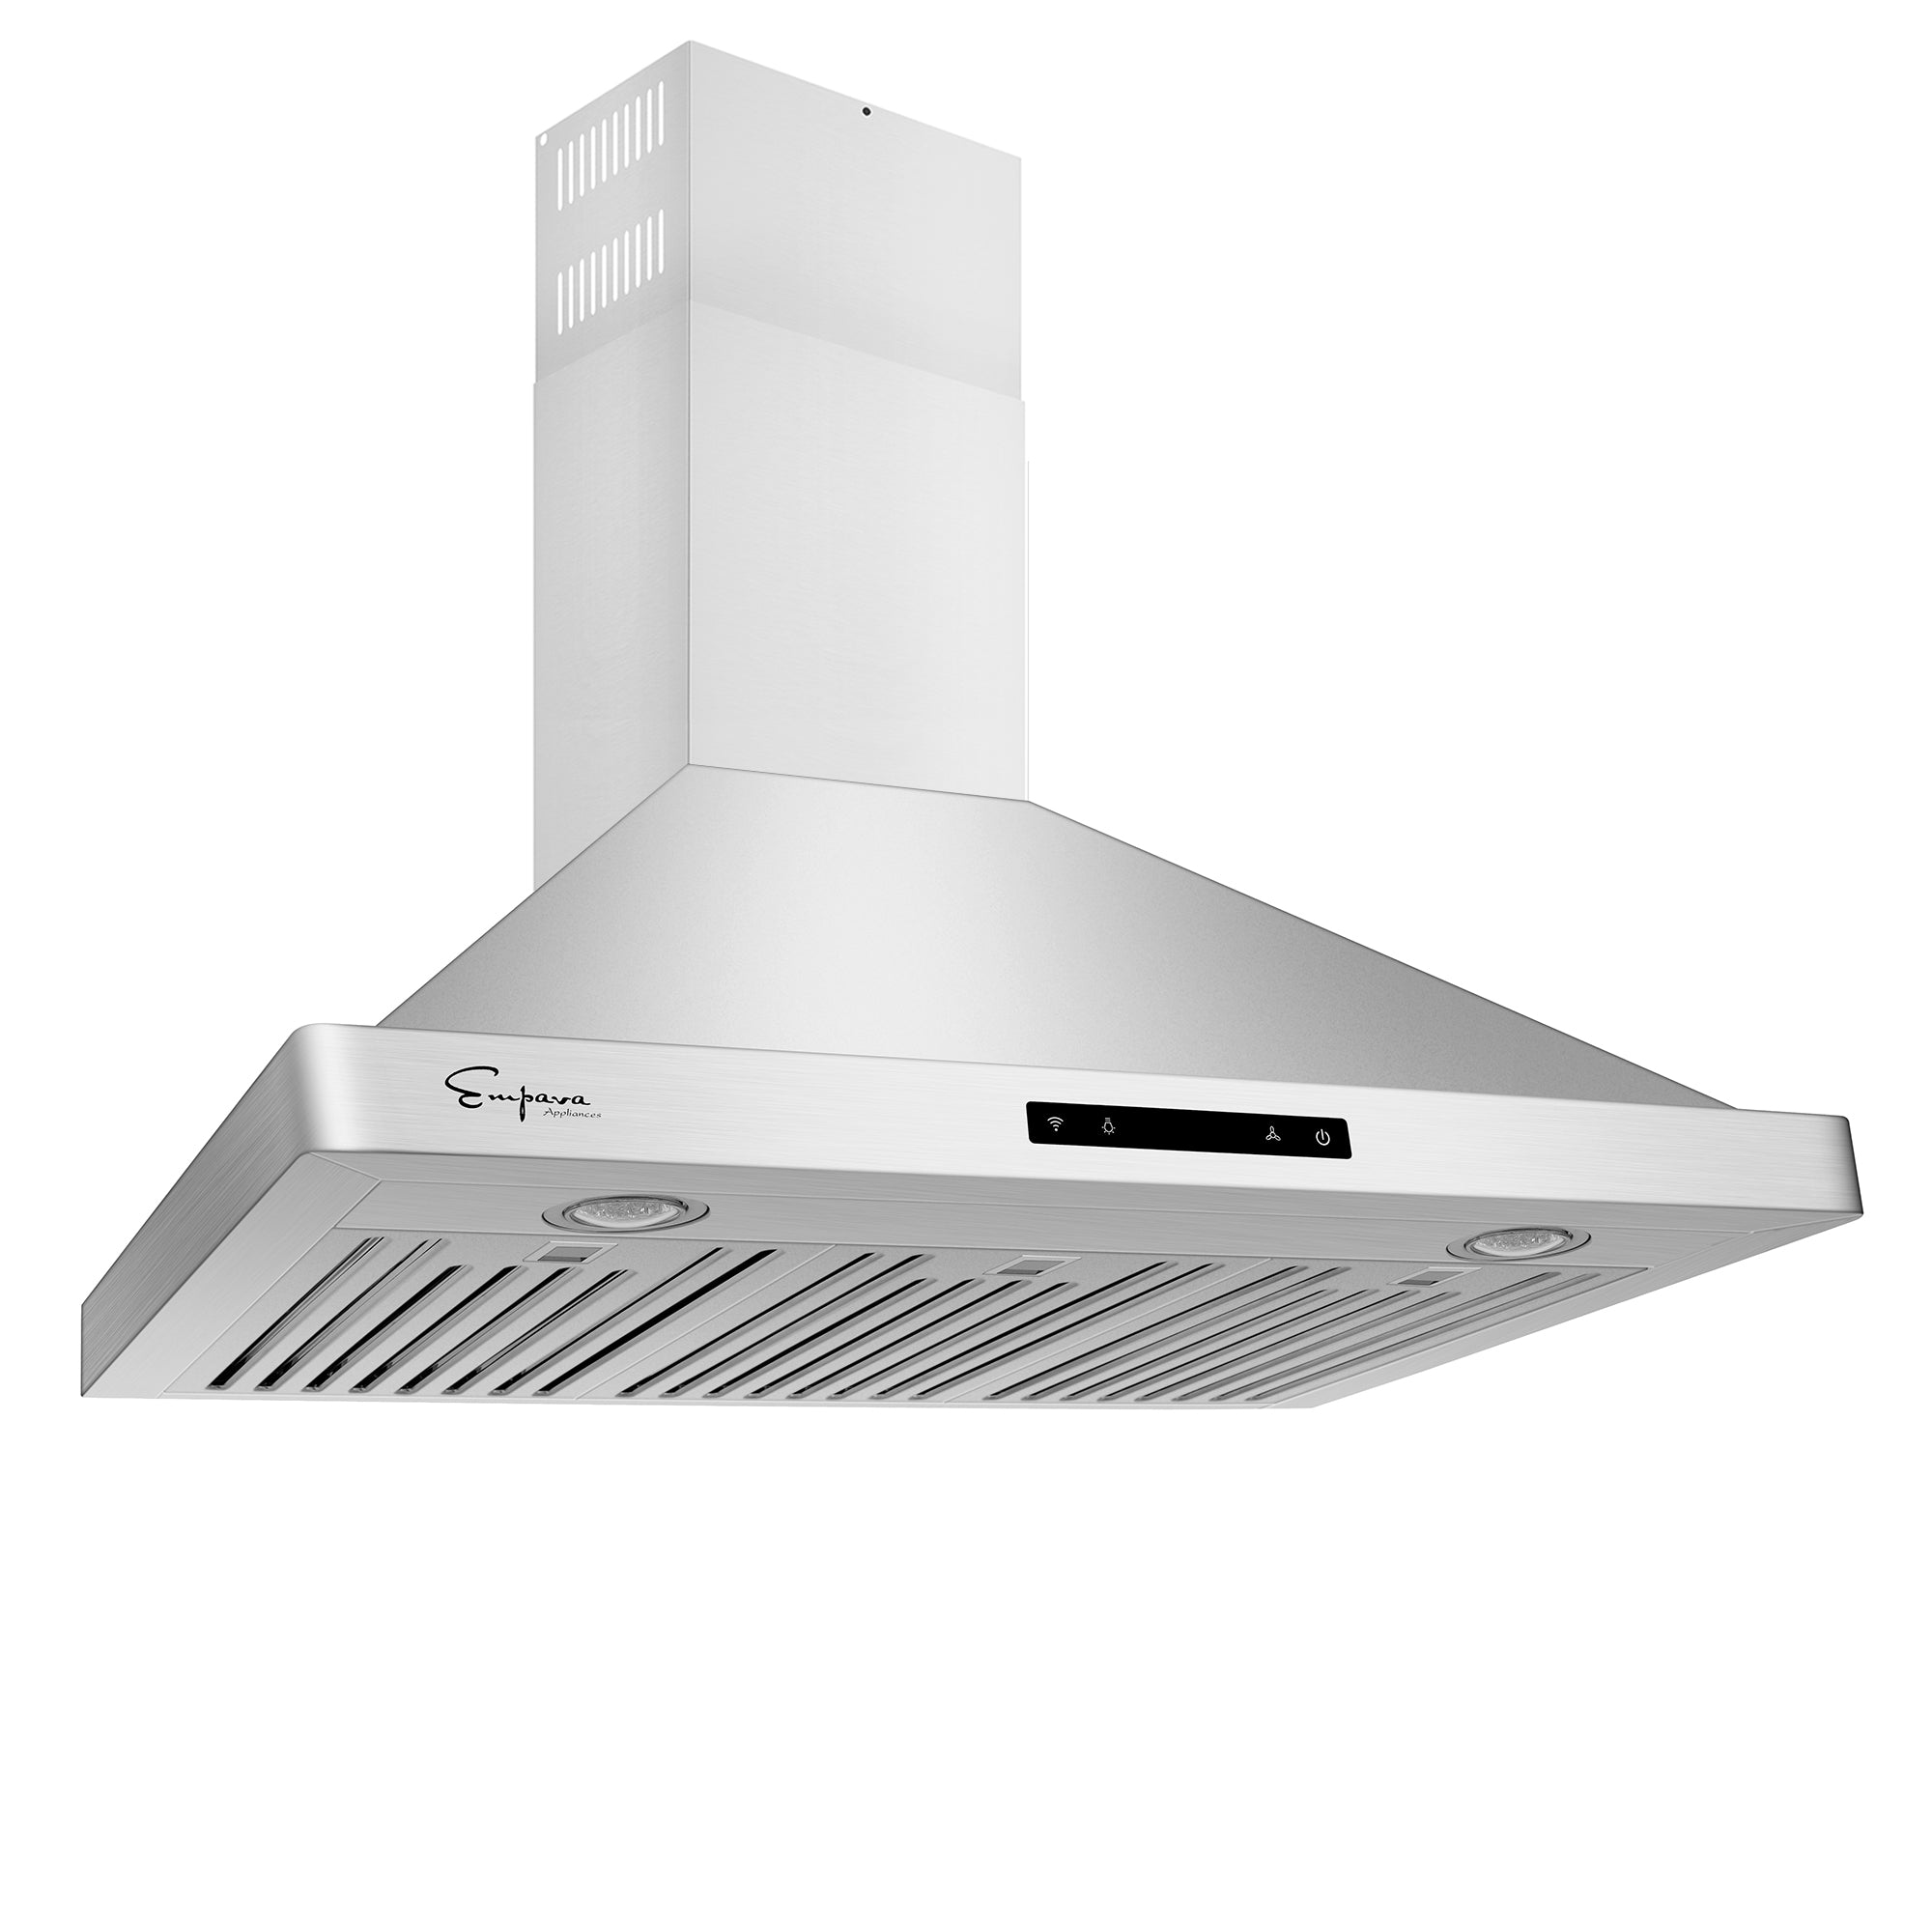 Empava Deluxe 36 in. 400 CFM Convertible Kitchen Island Range Hood in Black  with Exhaust Kitchen Vent Duct and Soft Controls EPV-36RH10 - The Home